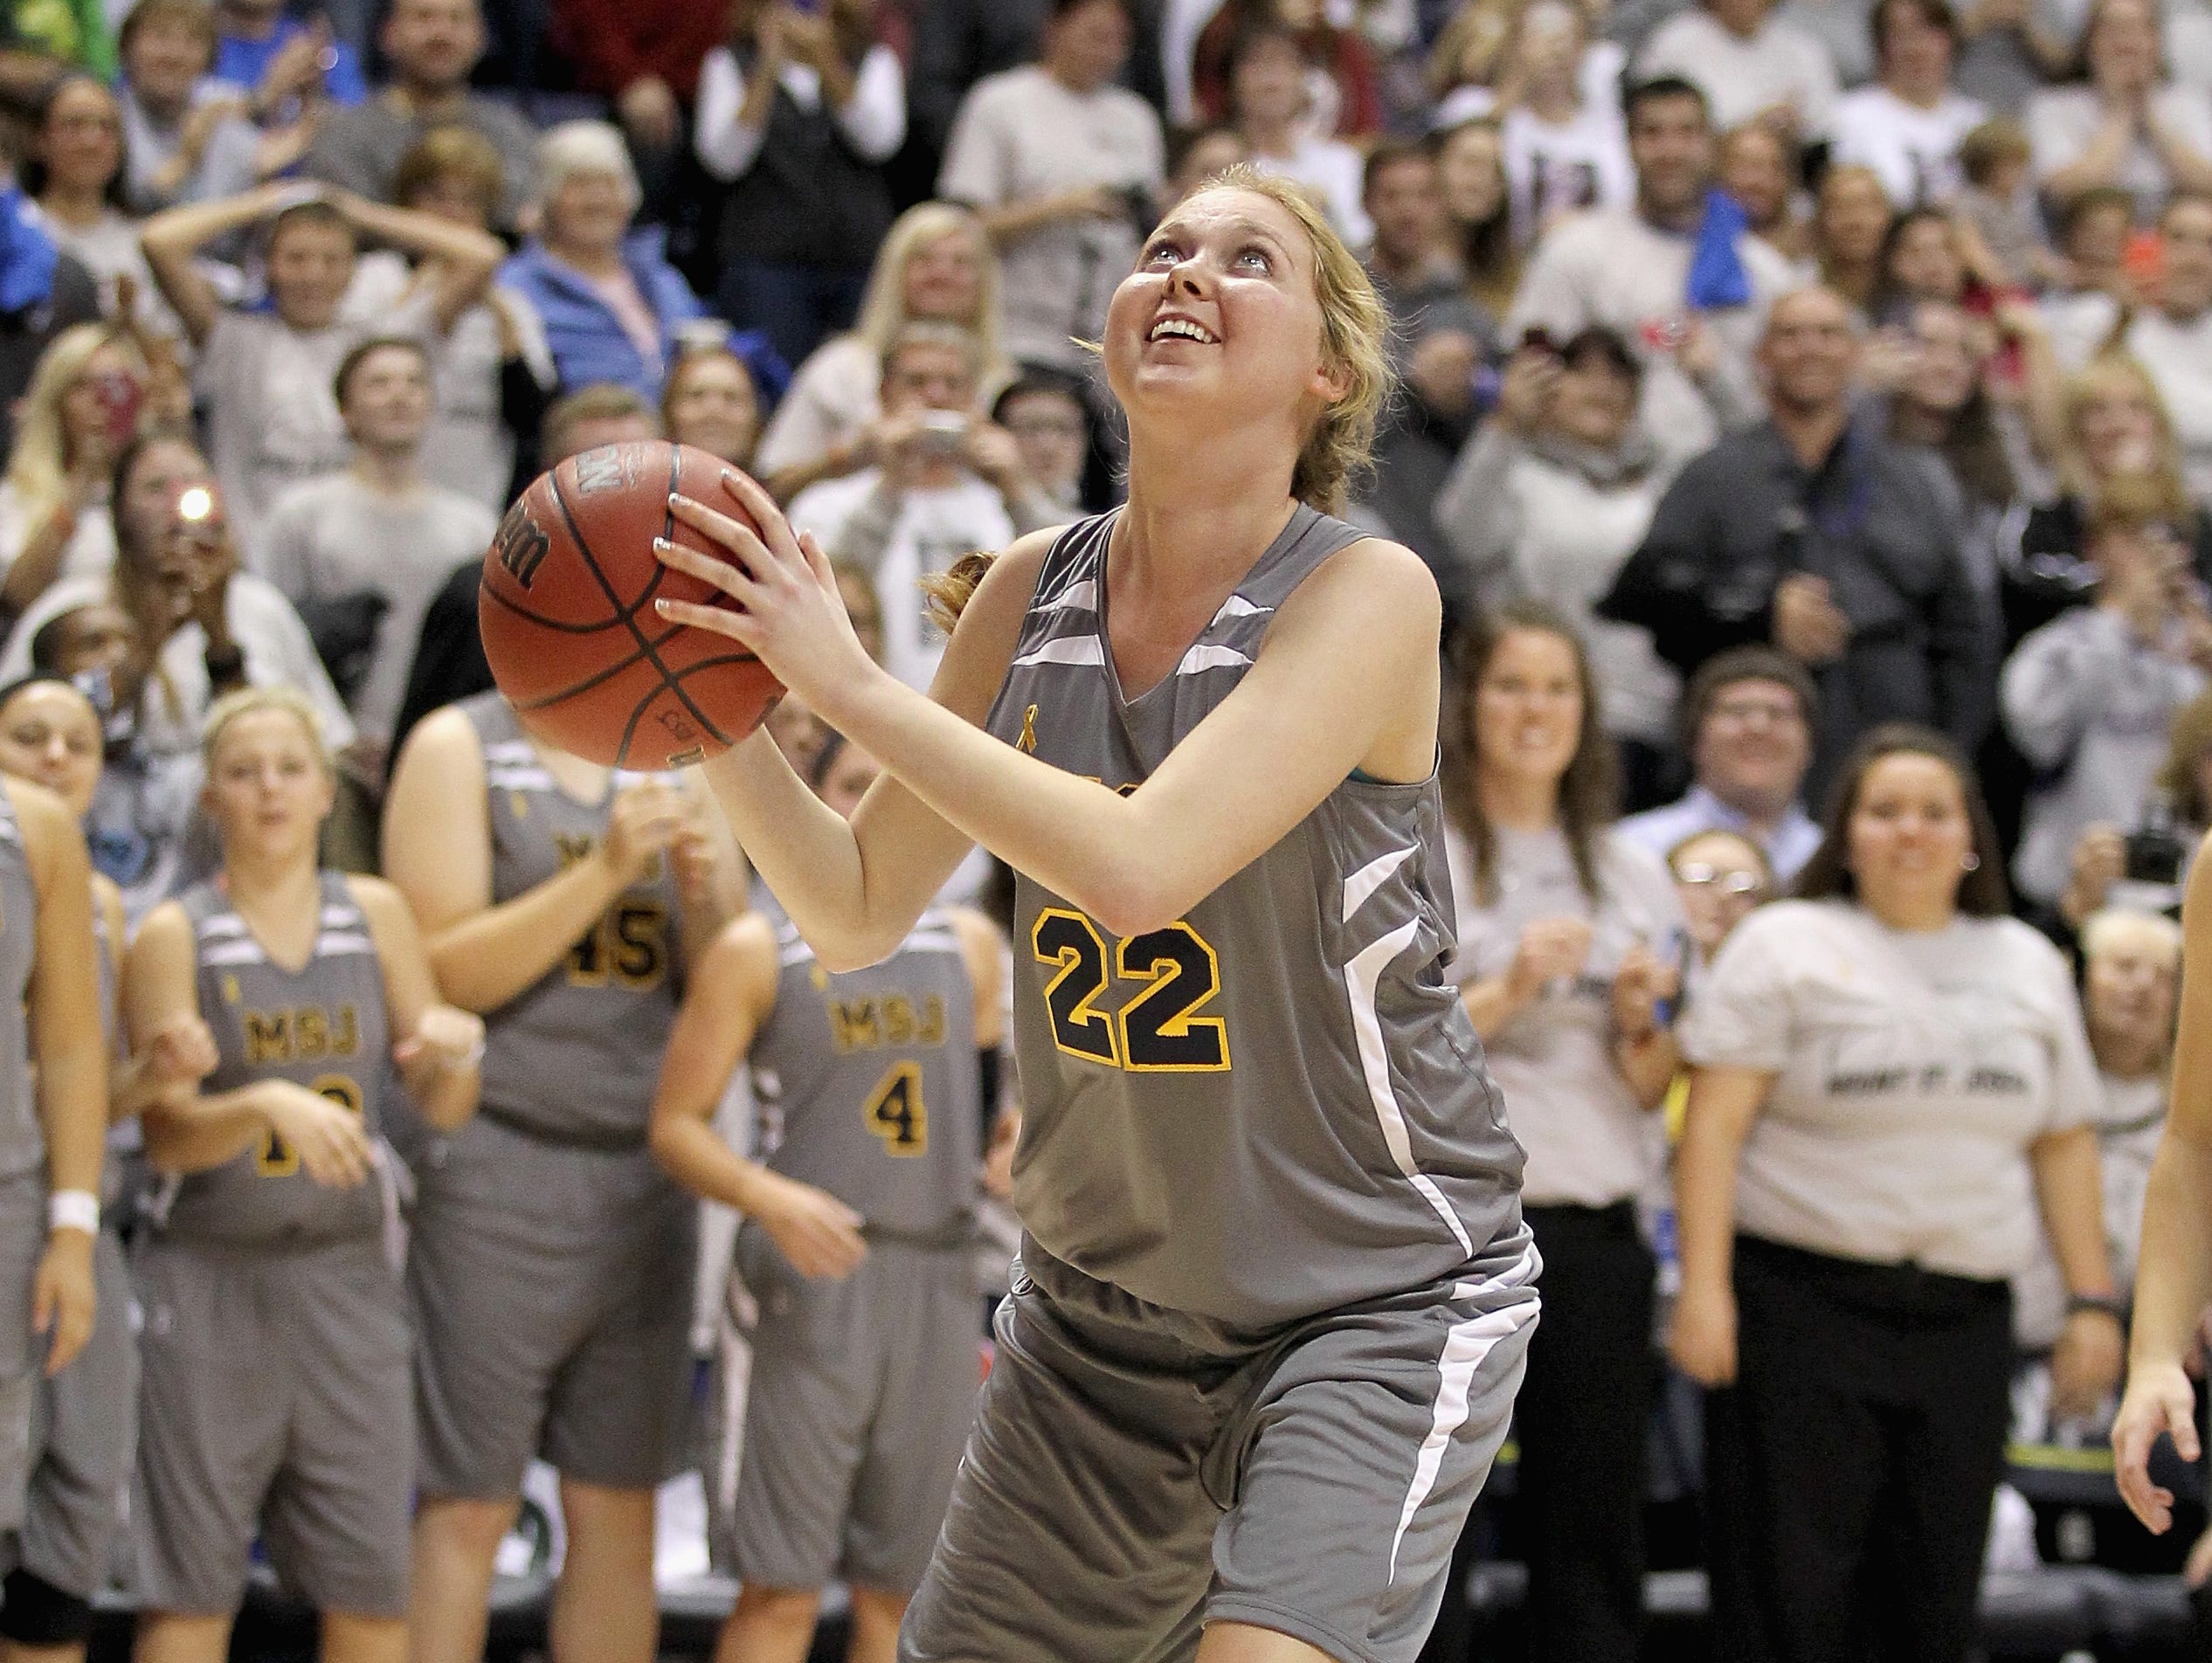 Lauren Hill of Mount St. Joseph shoots to score her second basket during the game against Hiram at Cintas Center on November 2, 2014 in Cincinnati, Ohio.